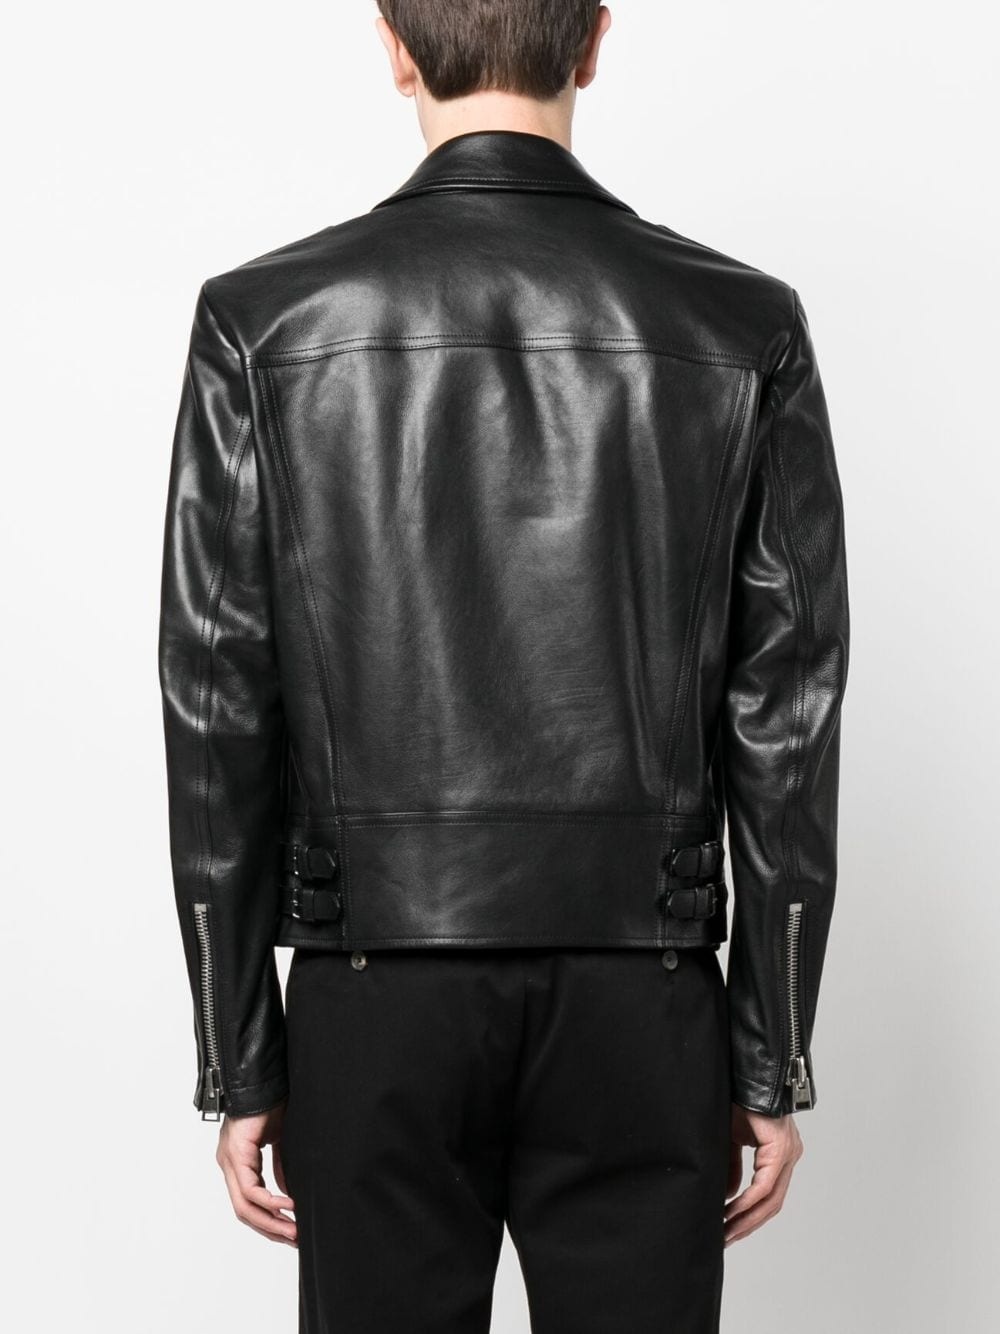 off-centre leather jacket - 4